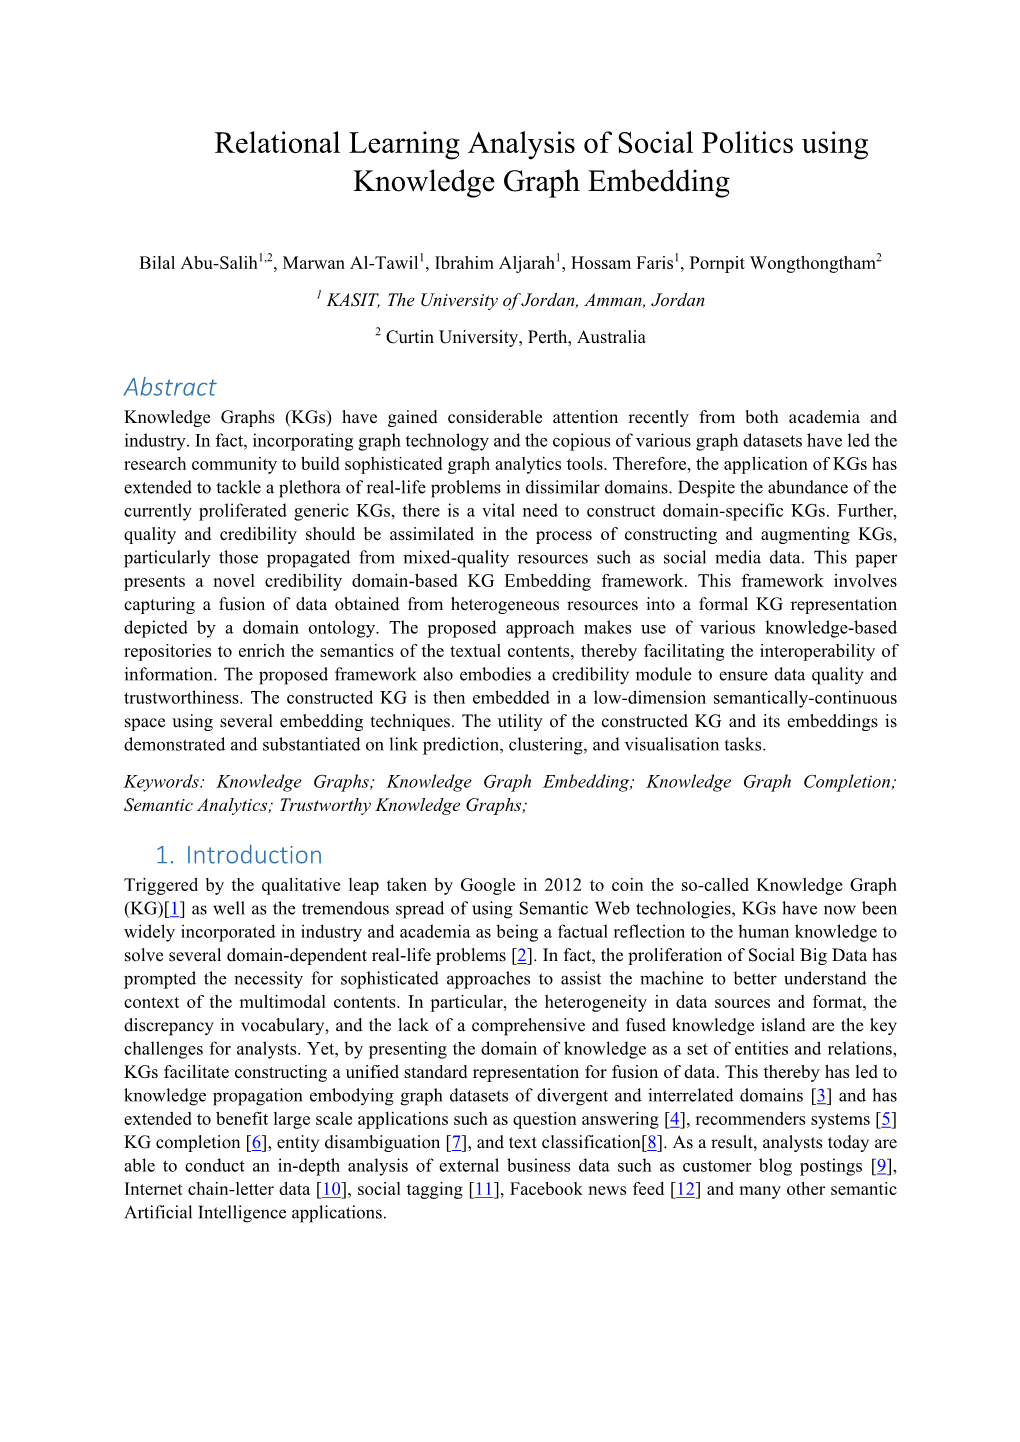 Relational Learning Analysis of Social Politics Using Knowledge Graph Embedding